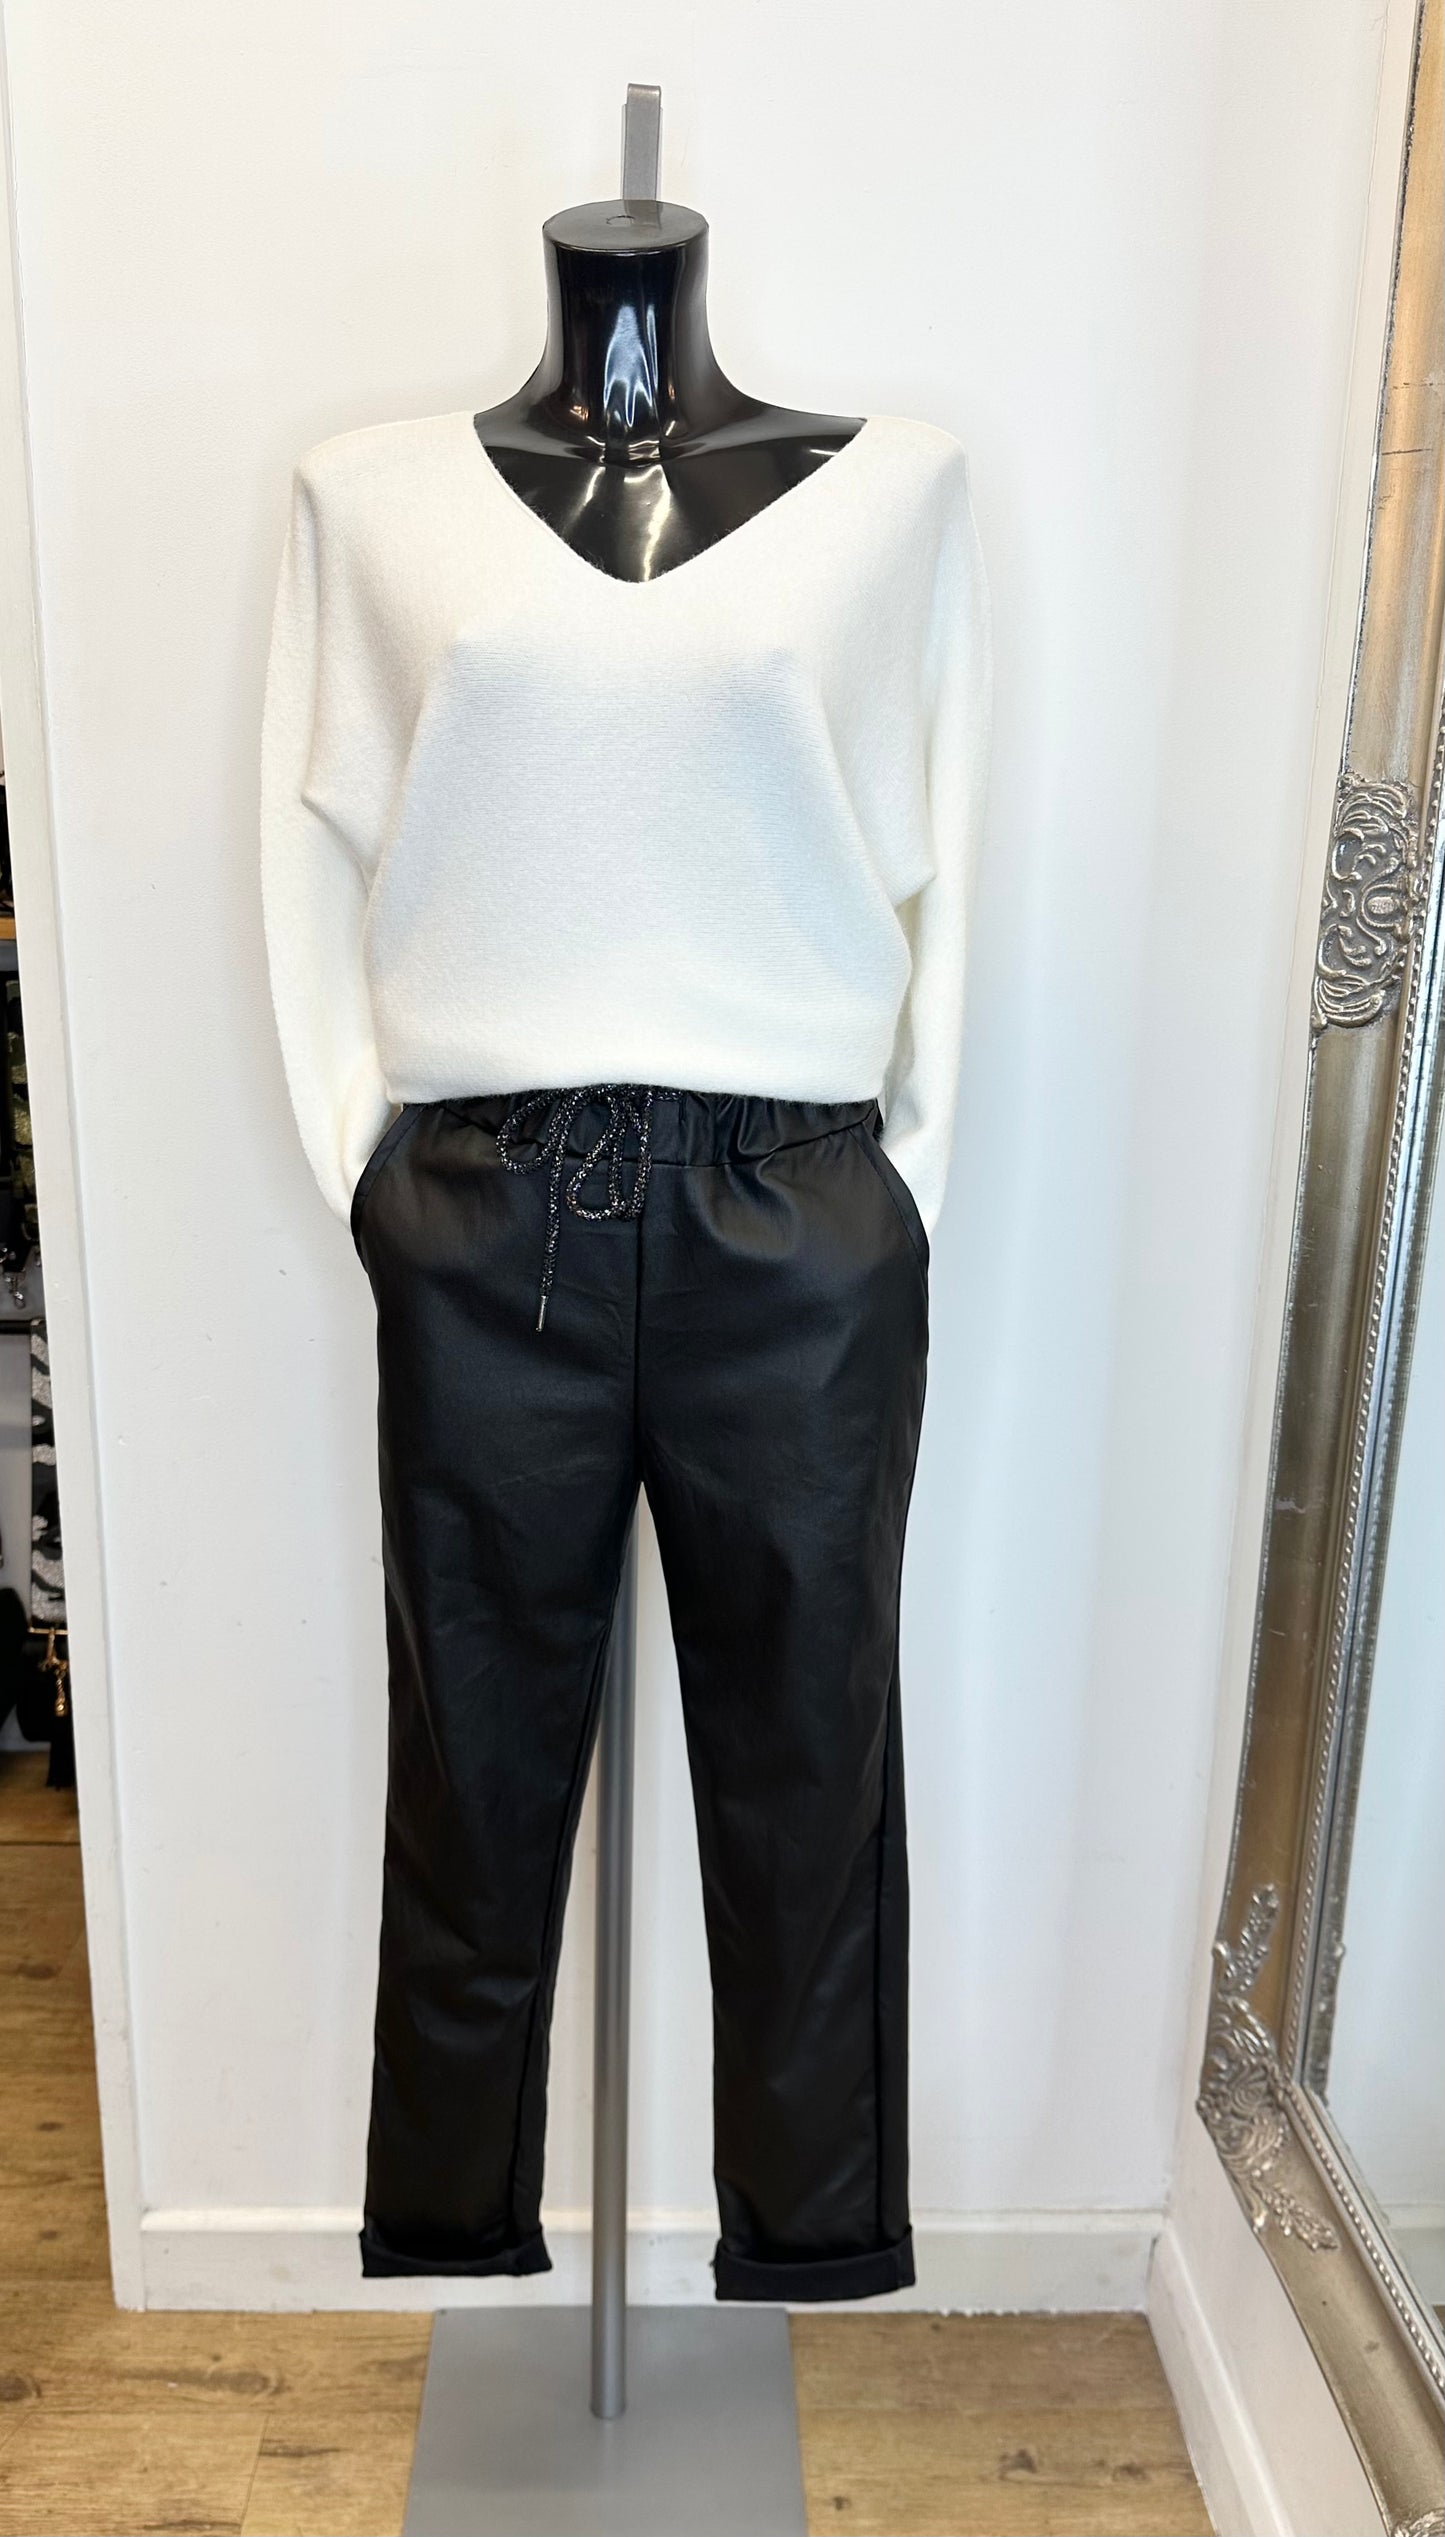 Black faux leather stretch trousers